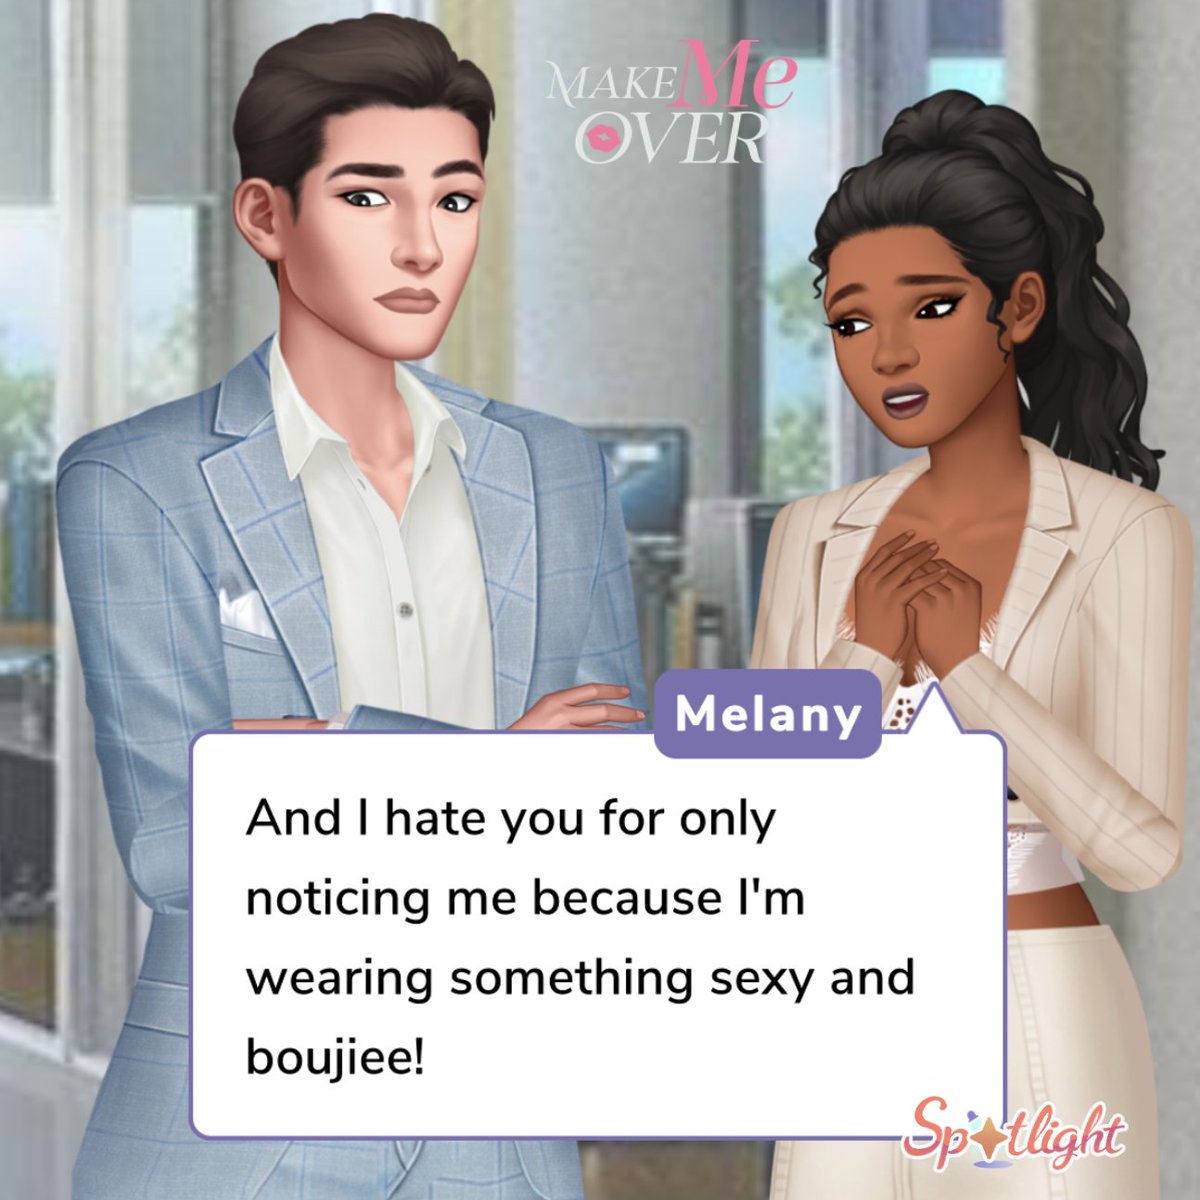 This is it! How does your story end? And WHO does it end with? 🤷🏻‍♀️💕
Read the Grand Finale of Make Me Over on Spotlight! 💖✨

#Spotlightgame #MakeMeOver #JessicaPrince #ChanceEncounters